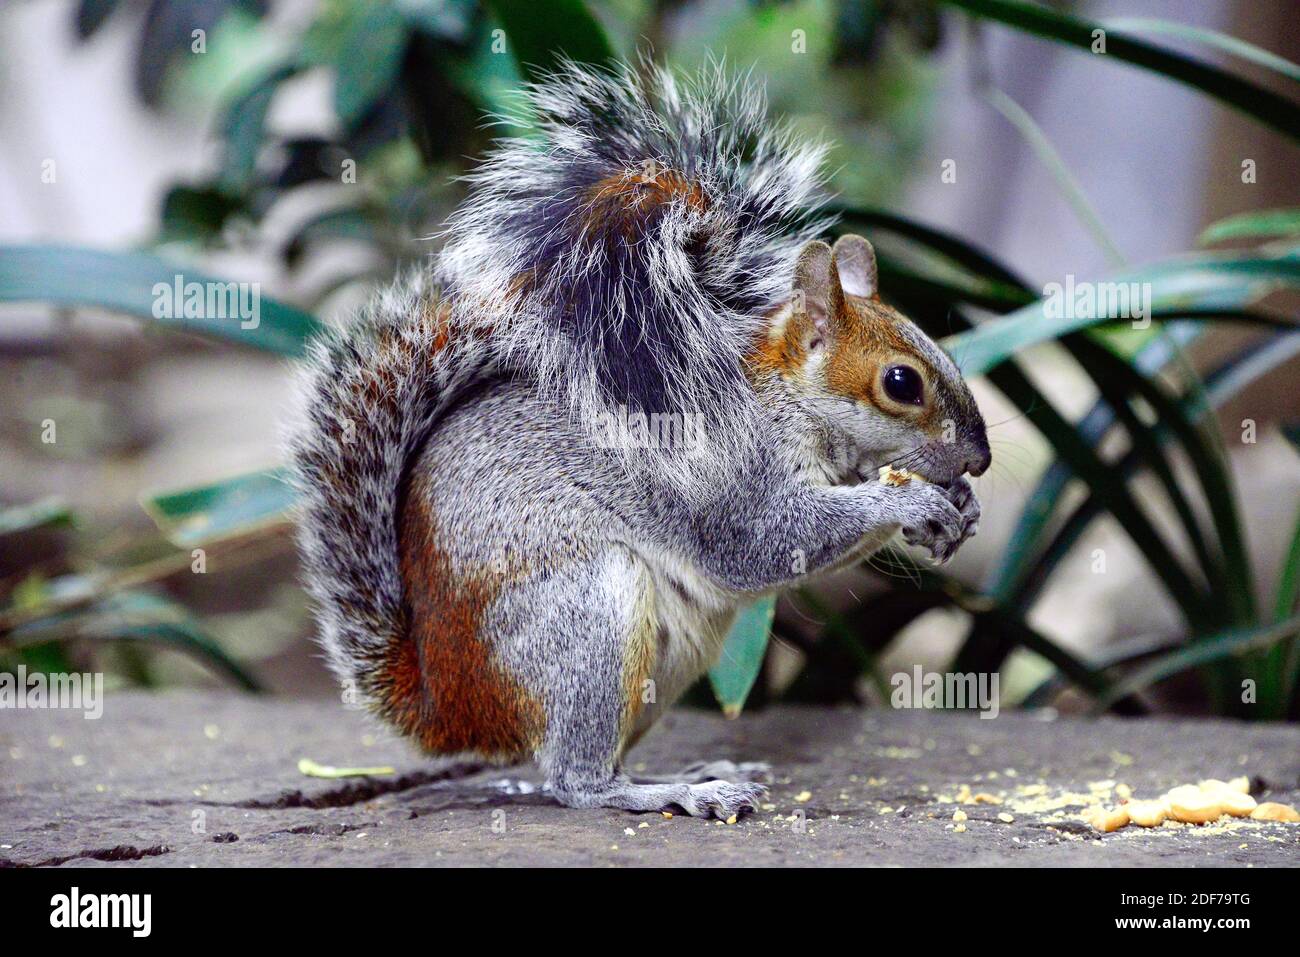 Mexican gray squirrel (Sciurus aureogaster) is a squirrel native to Mexico and Guatemala. This photo was taken in a Mexico City garden. Stock Photo